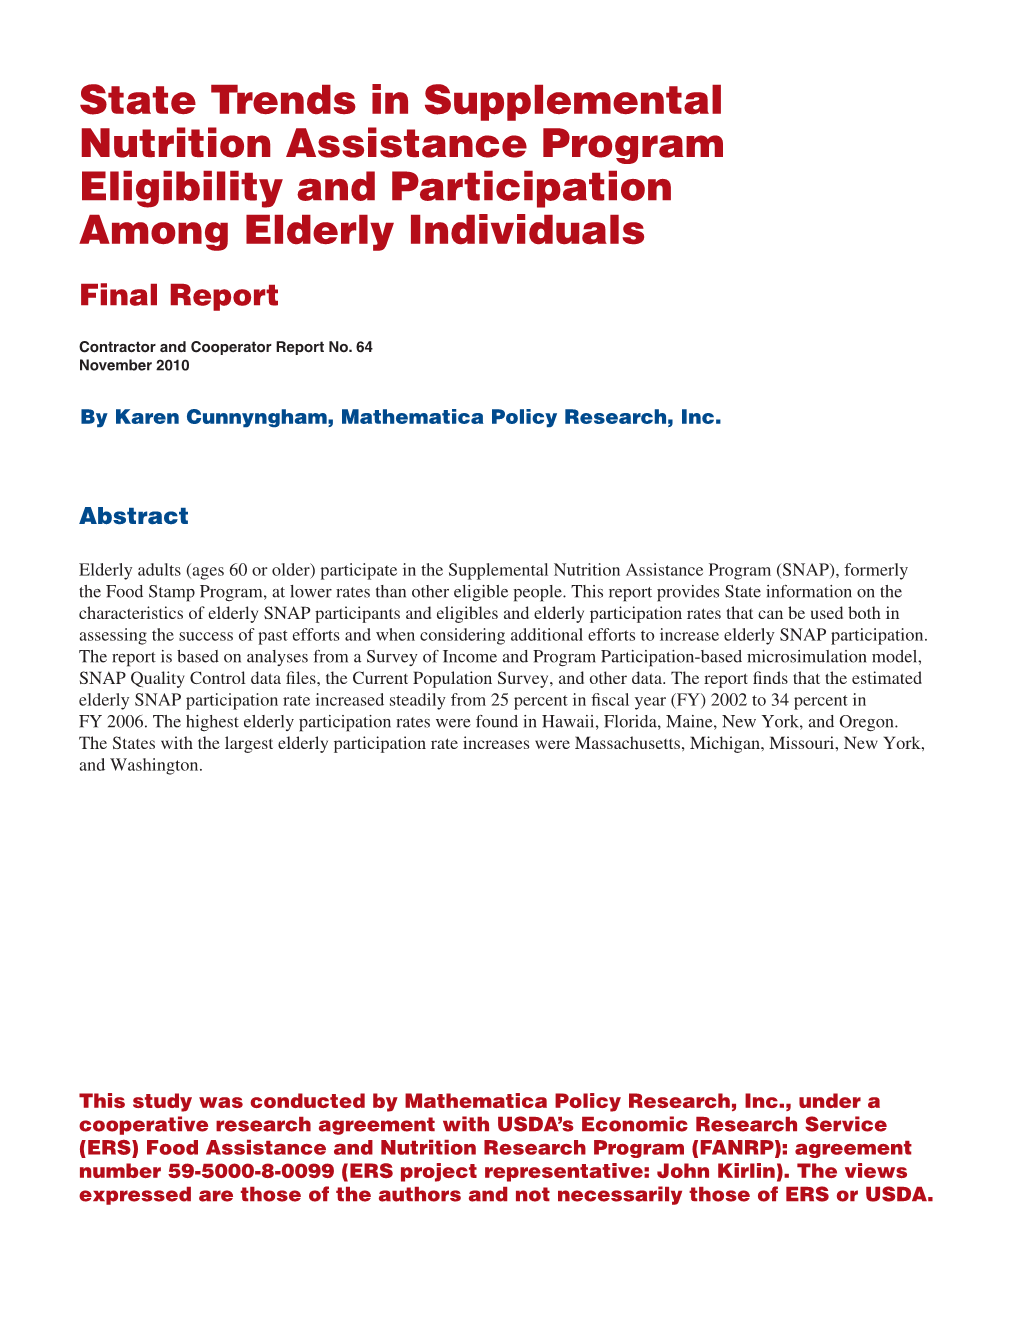 State Trends in Supplemental Nutrition Assistance Program Eligibility and Participation Among Elderly Individuals Final Report